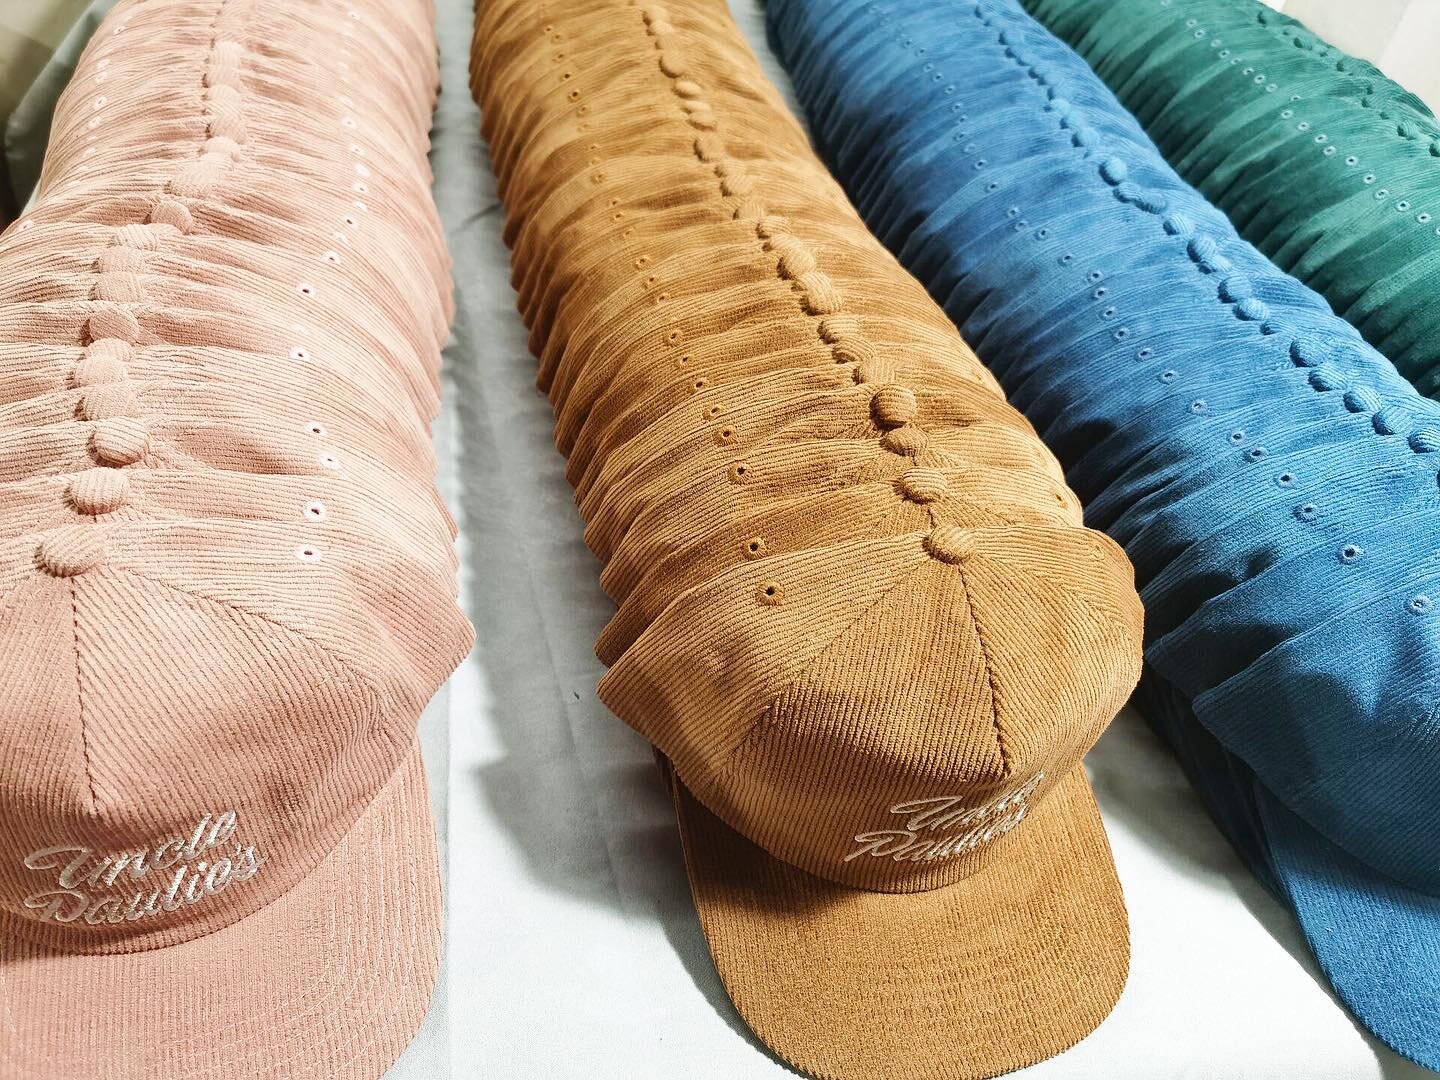 Roll Call! A selection of recent productions&hellip;
.
.
#bongiornobrand #custommade #headwear #hats